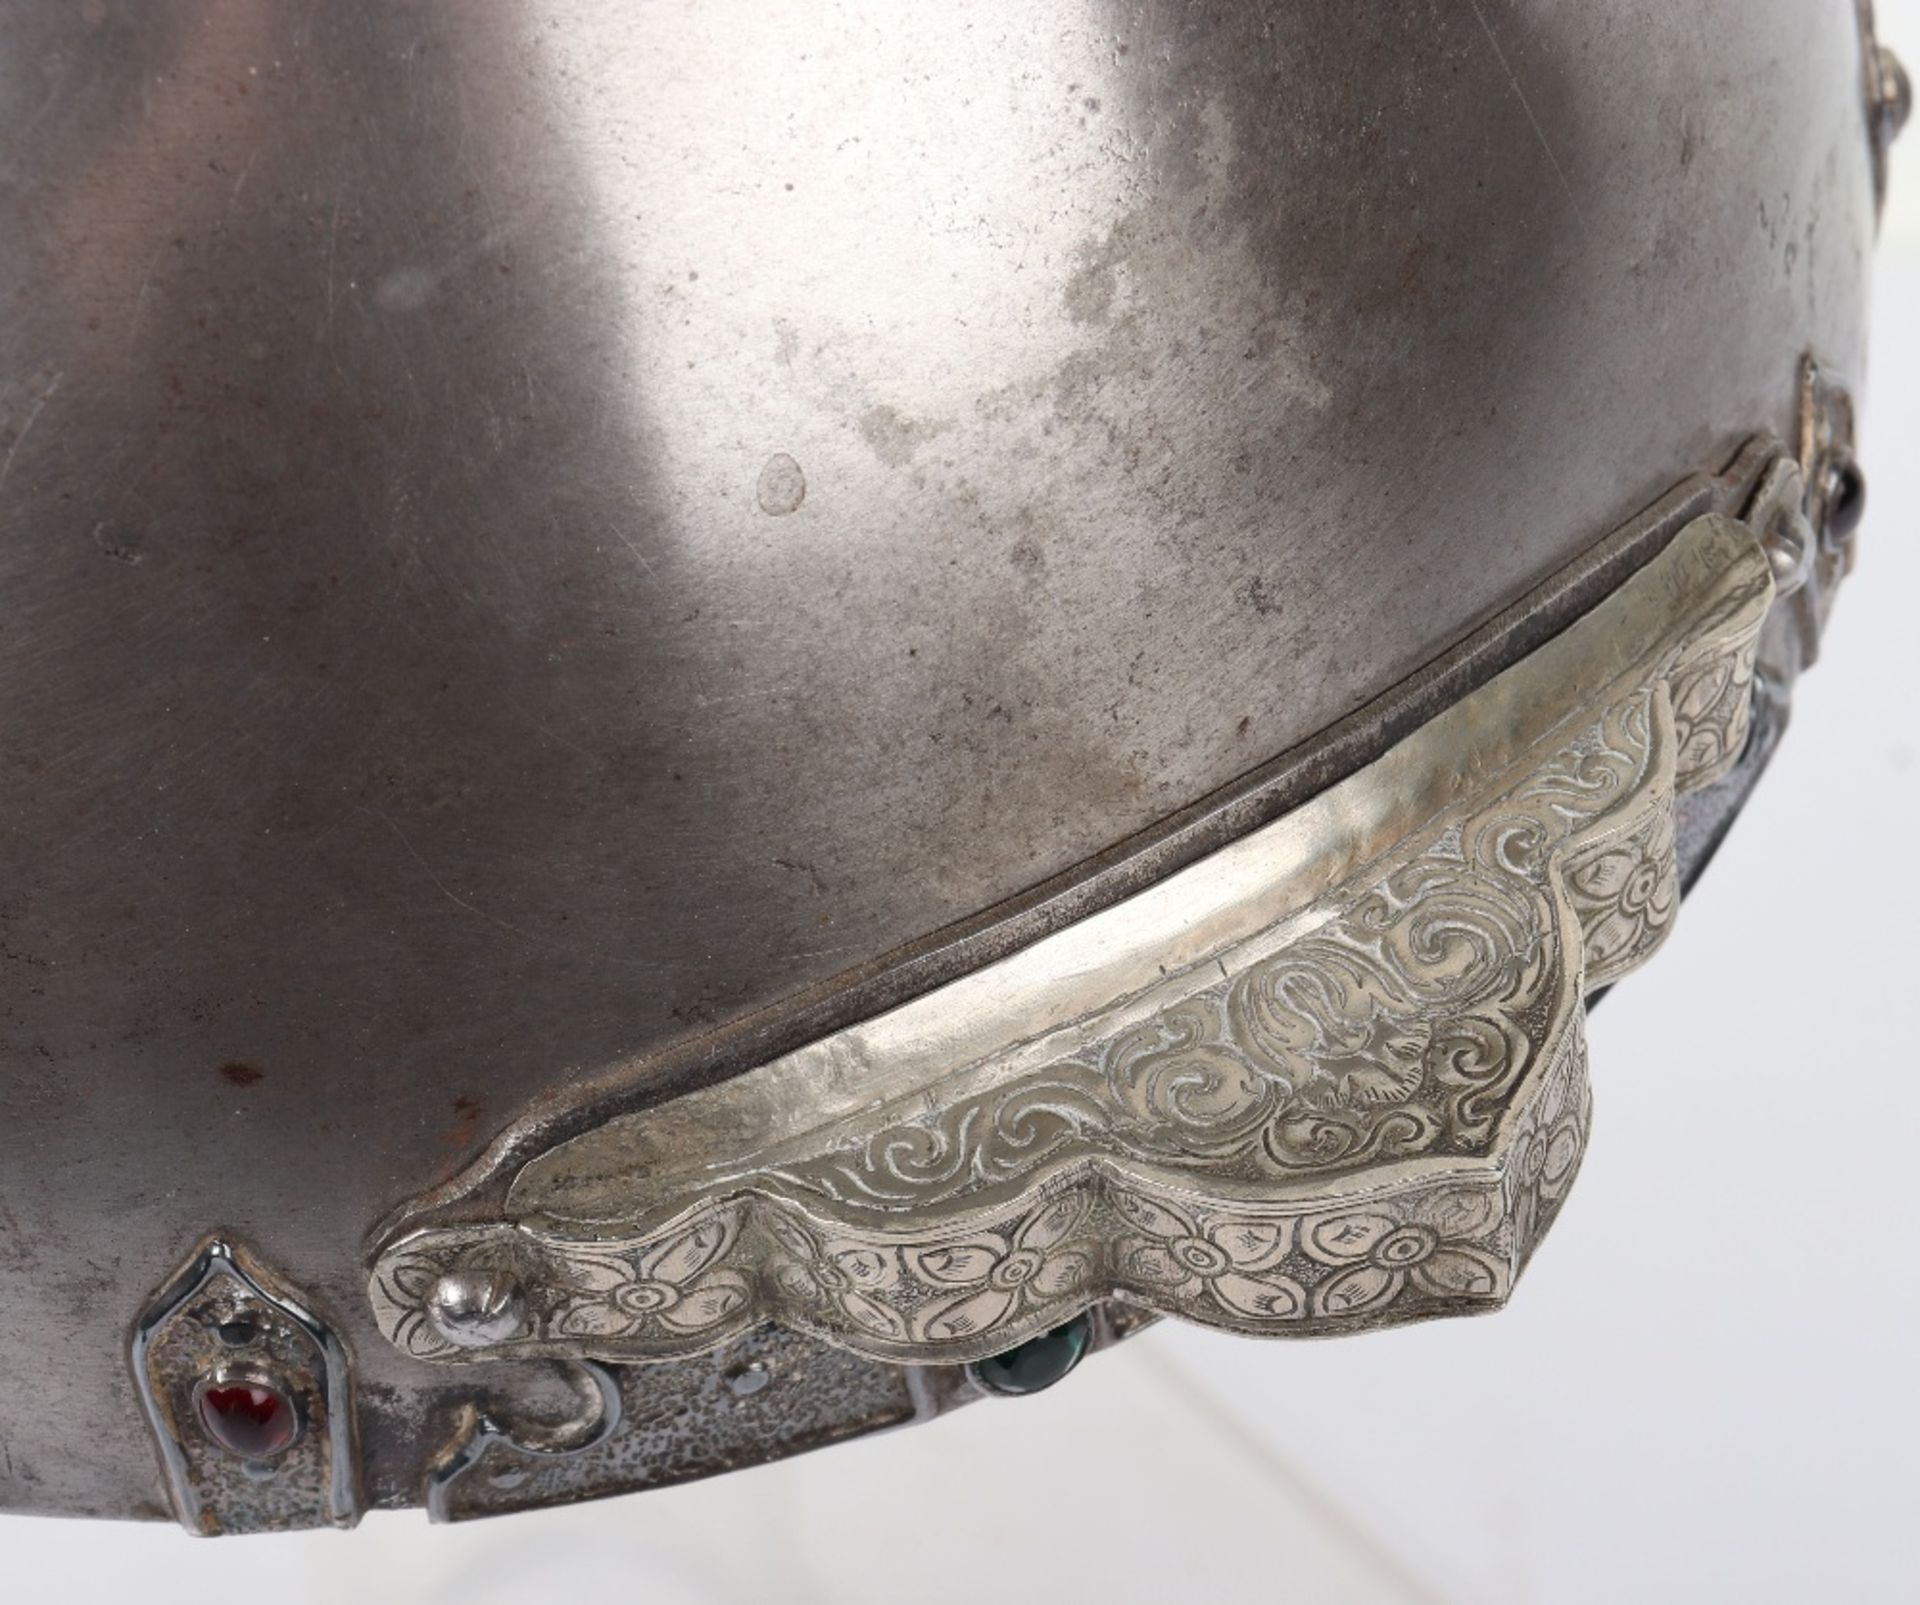 Bhutanese Helmet Possibly 18th or 19th Century - Image 10 of 15